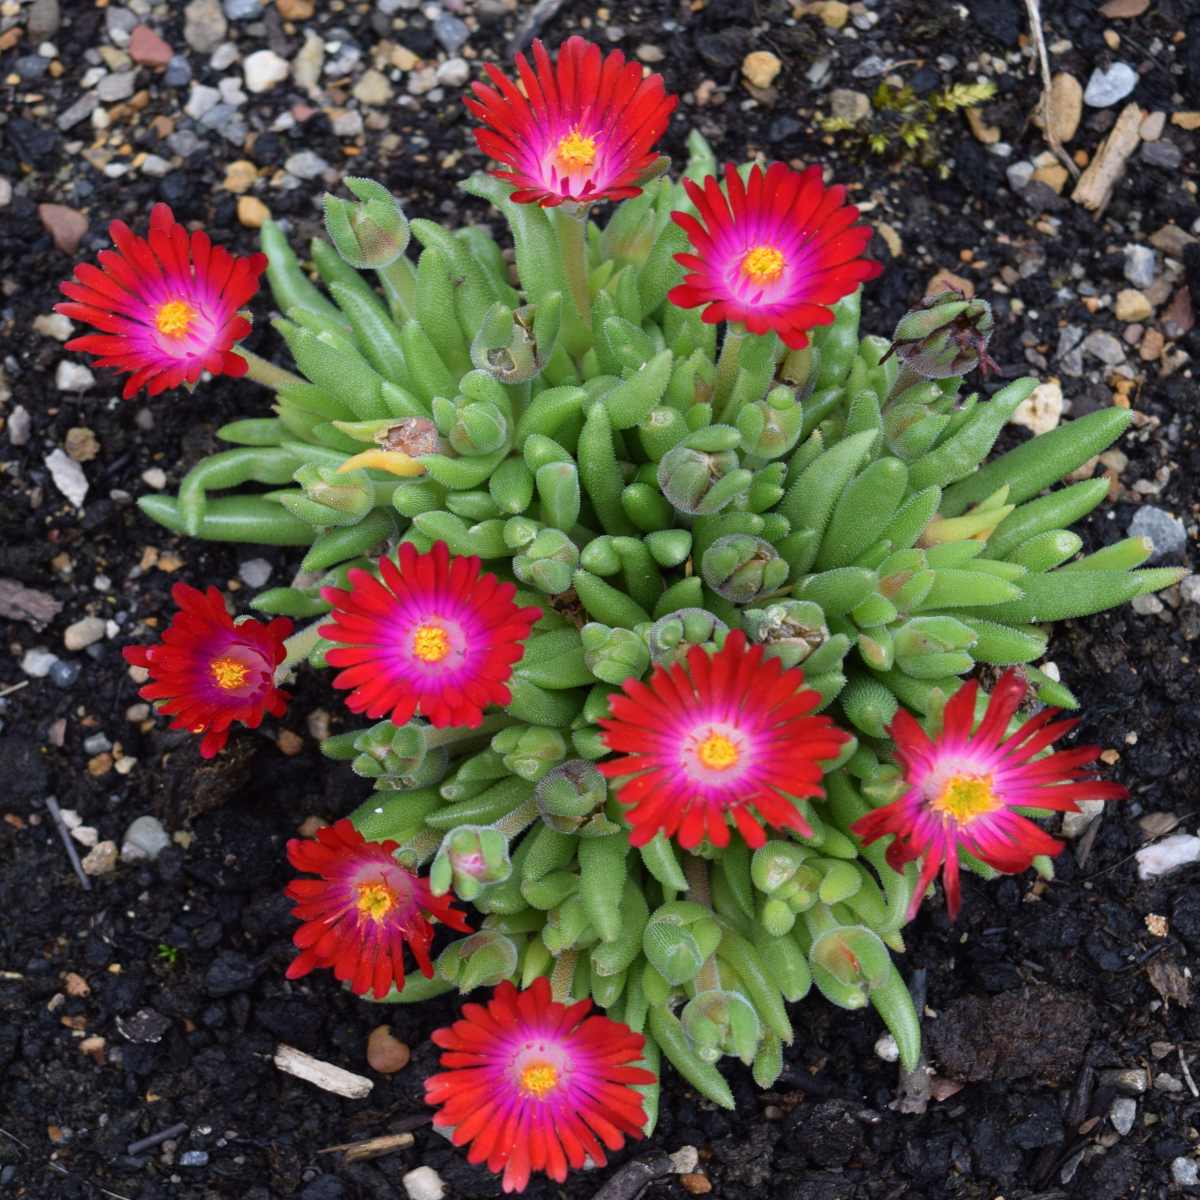 delosperma cooperi, perennial ice plant - our advice on caring for it